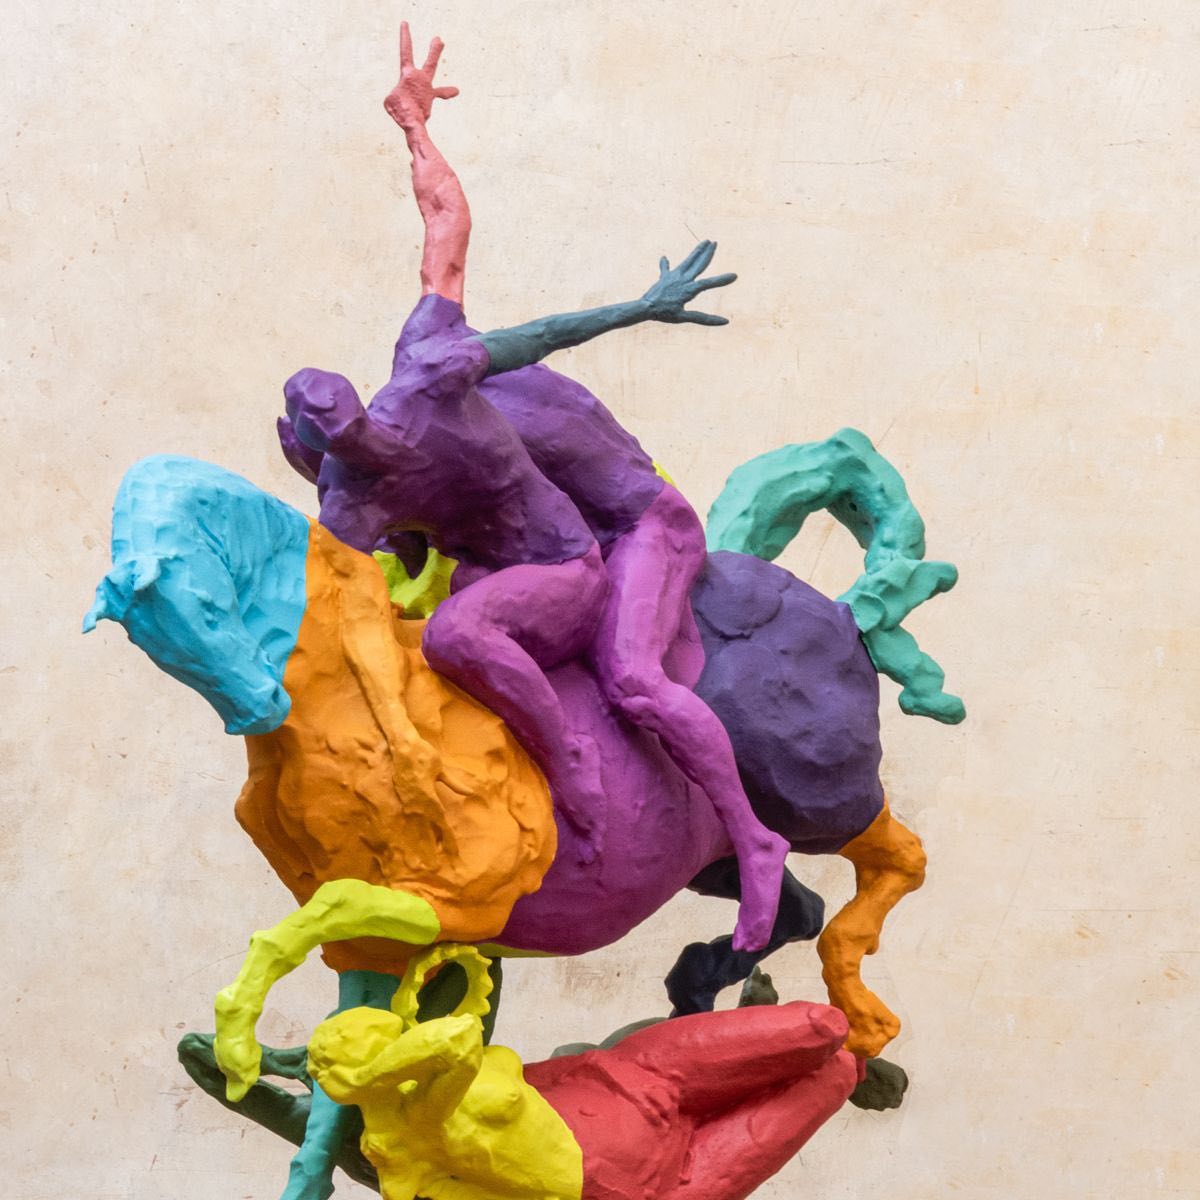 Multicolored 3d Printed Sculptures By Javier Marin (3)